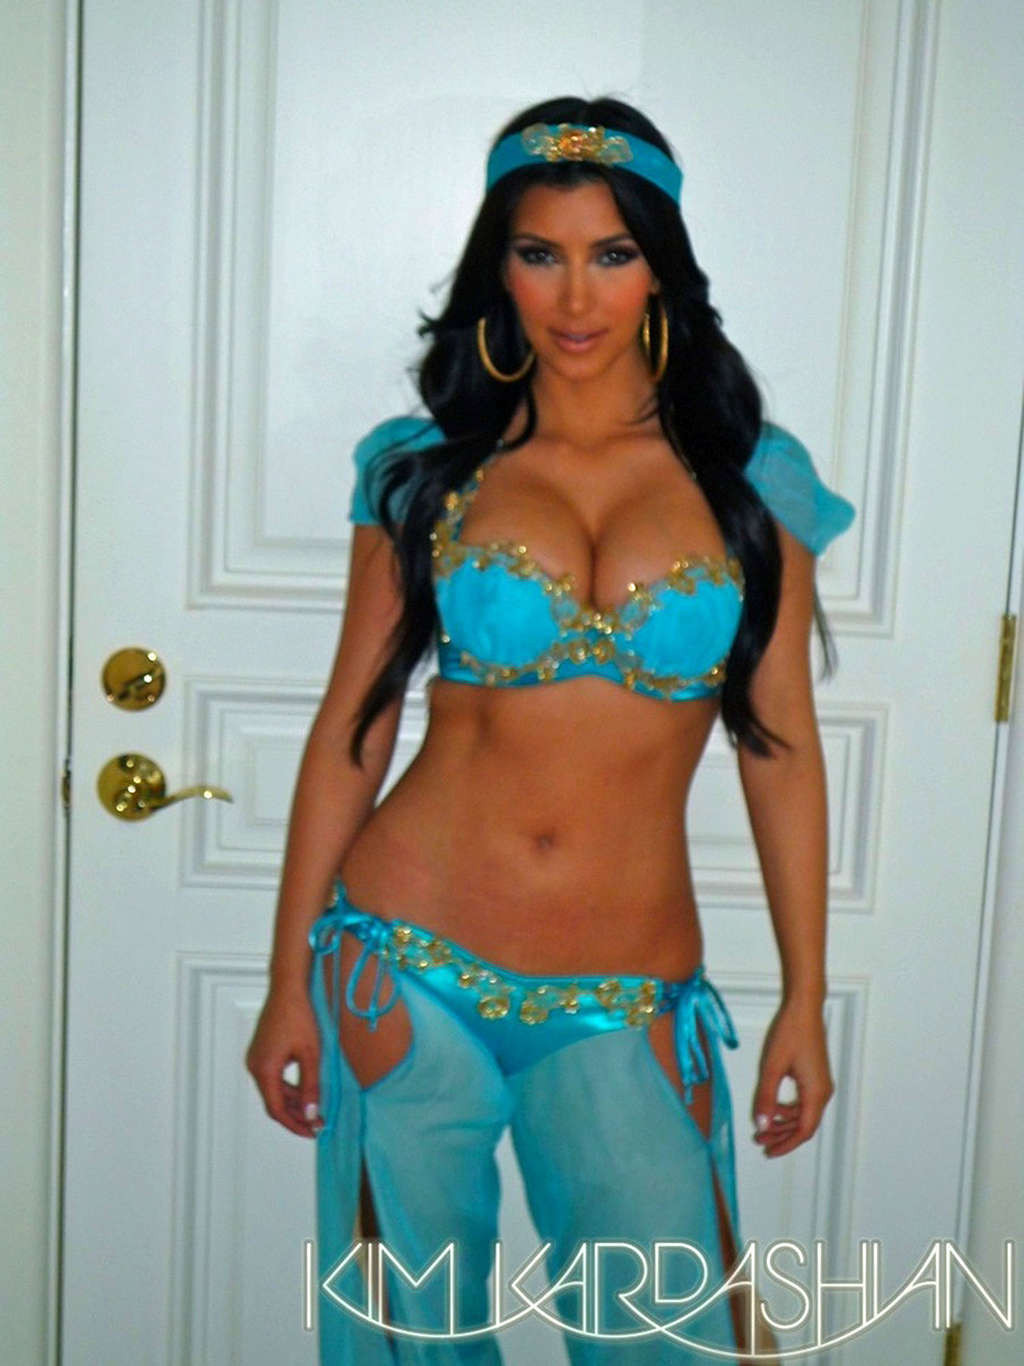 Kim Kardashian looking sexy in helloween costume and showing her tits #75375593